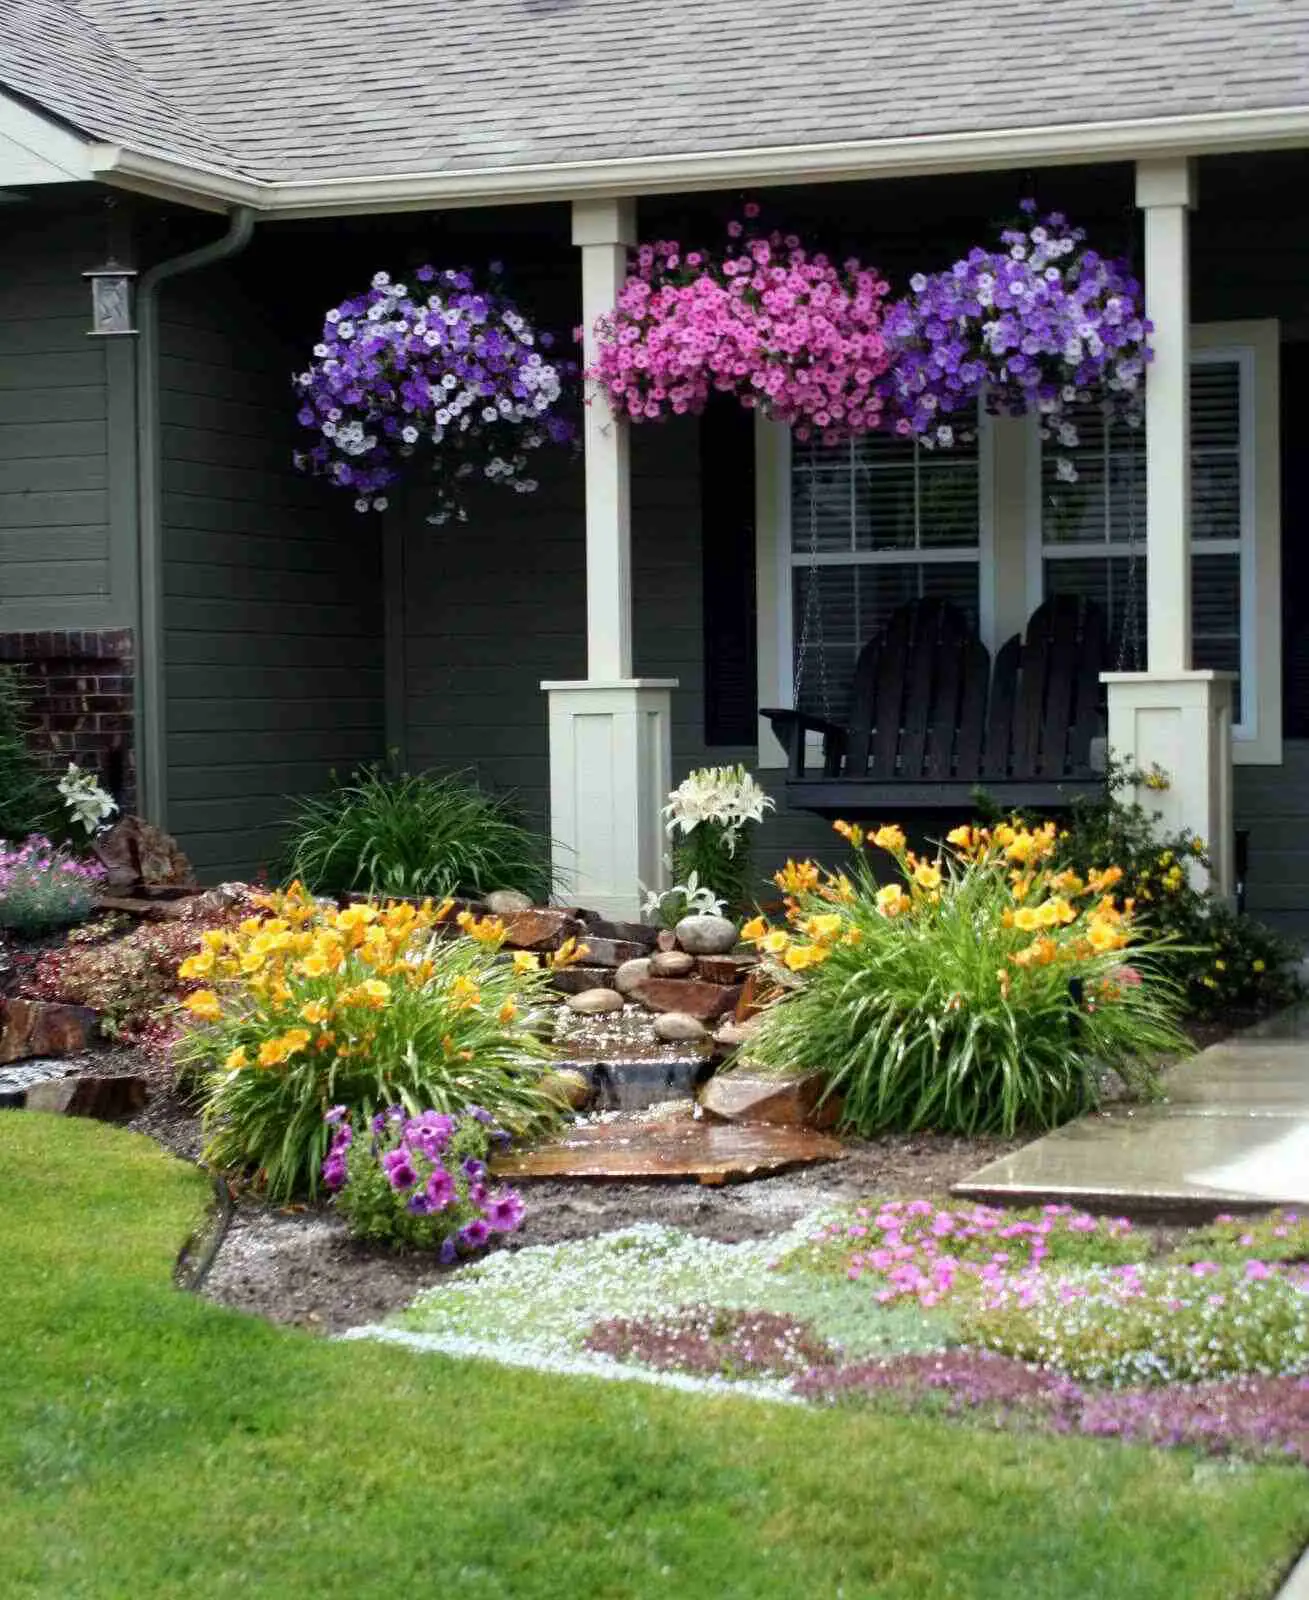 Petunias, Front Yard Landscaping Ideas and projects